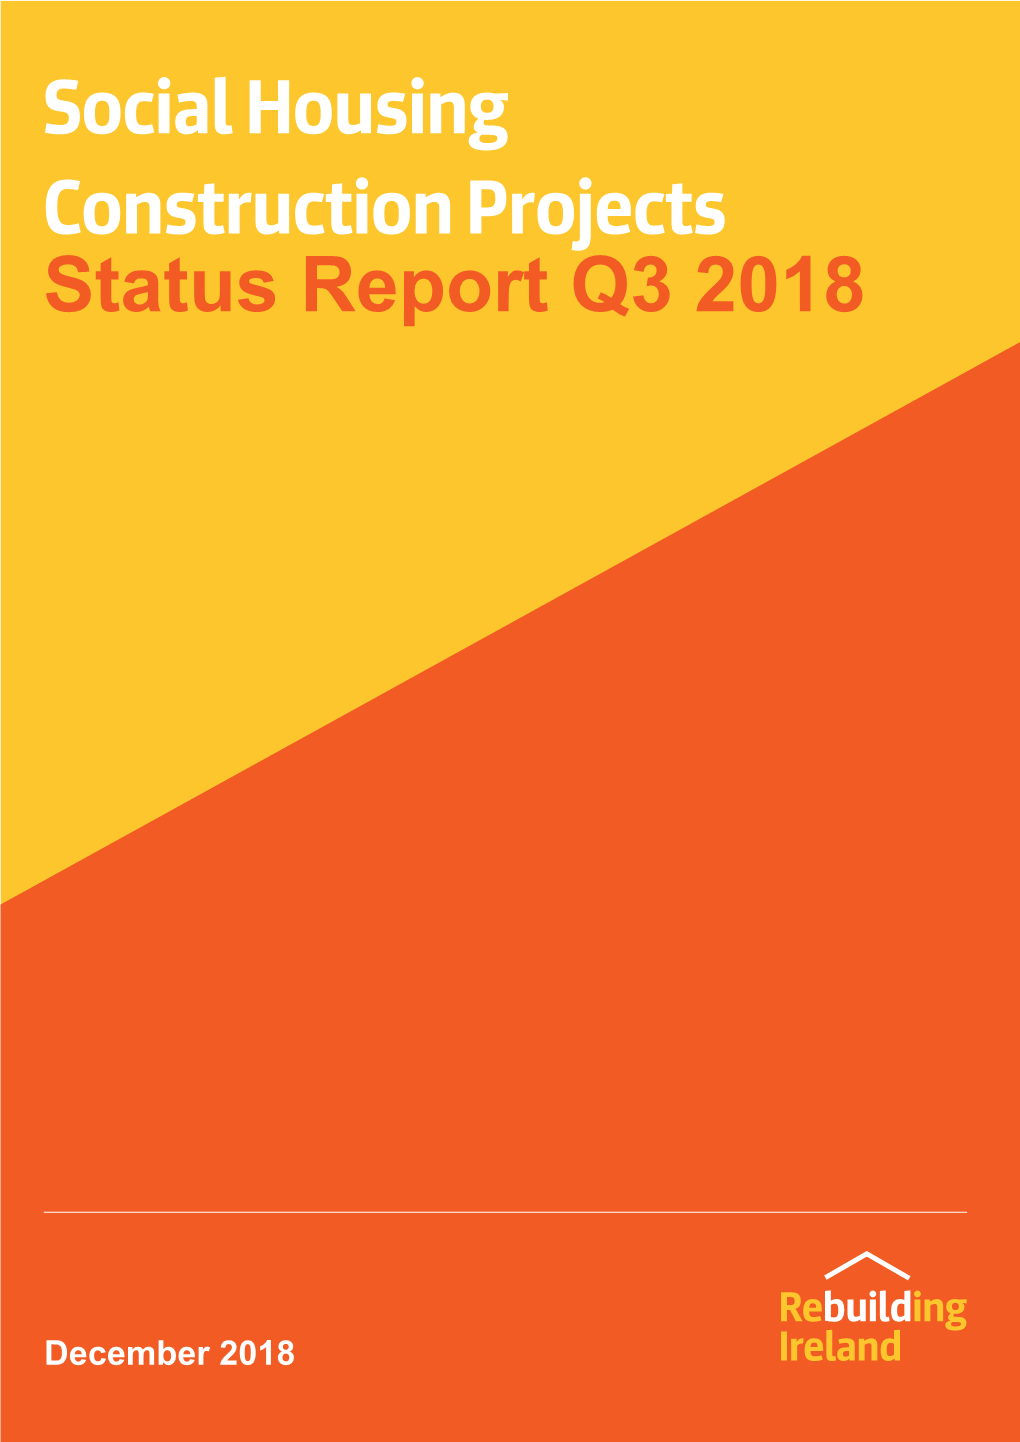 Social Housing Construction Projects Status Report Q3 2018